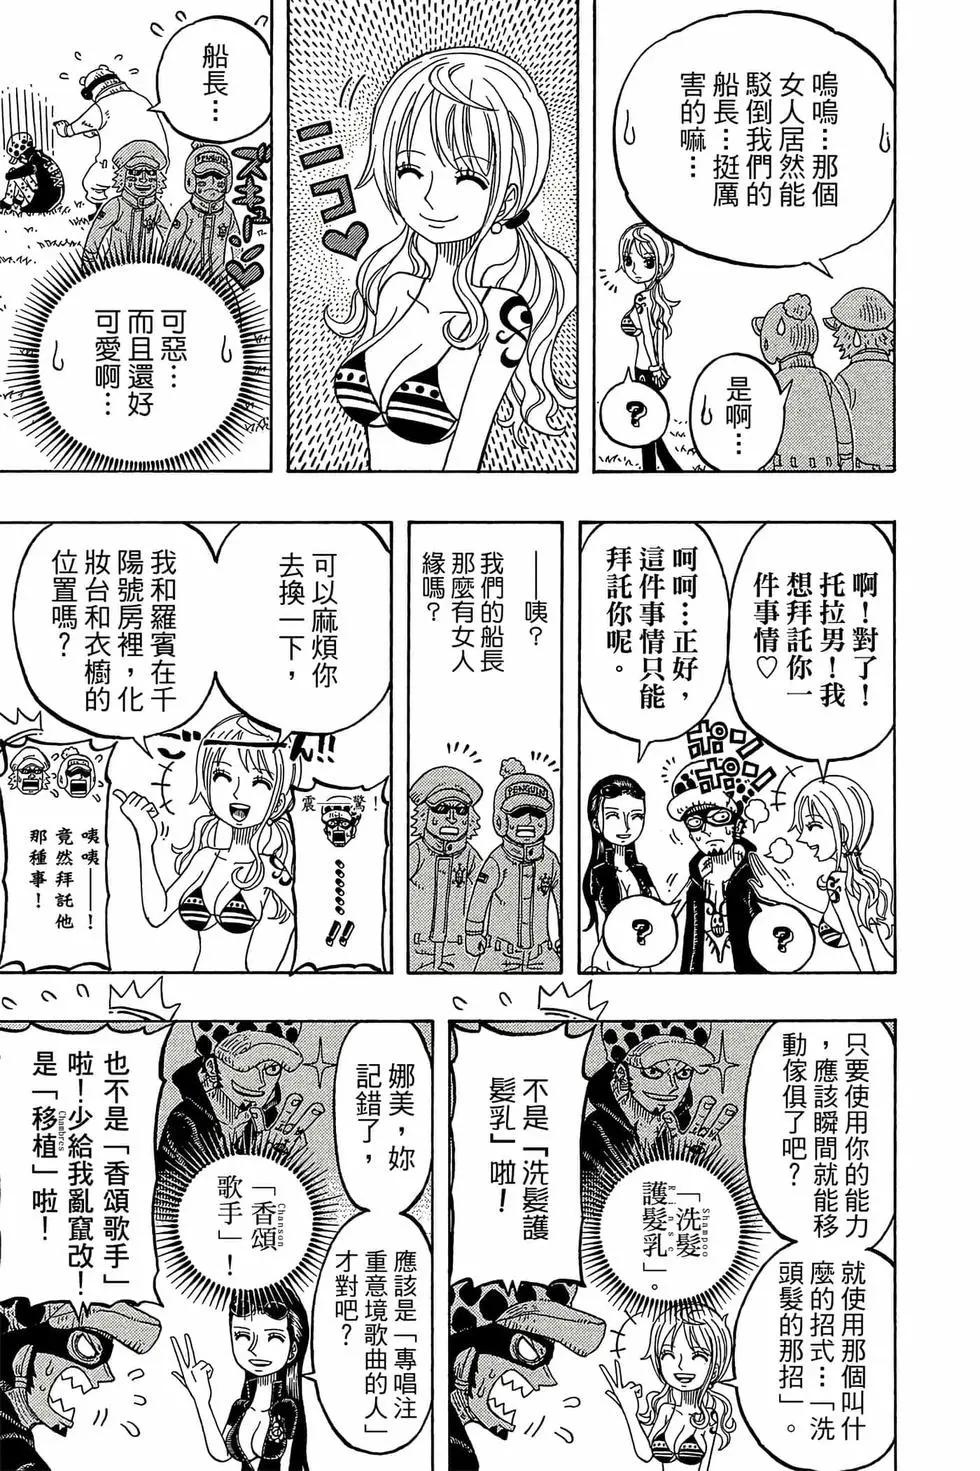 One piece party - 第02卷(1/4) - 8